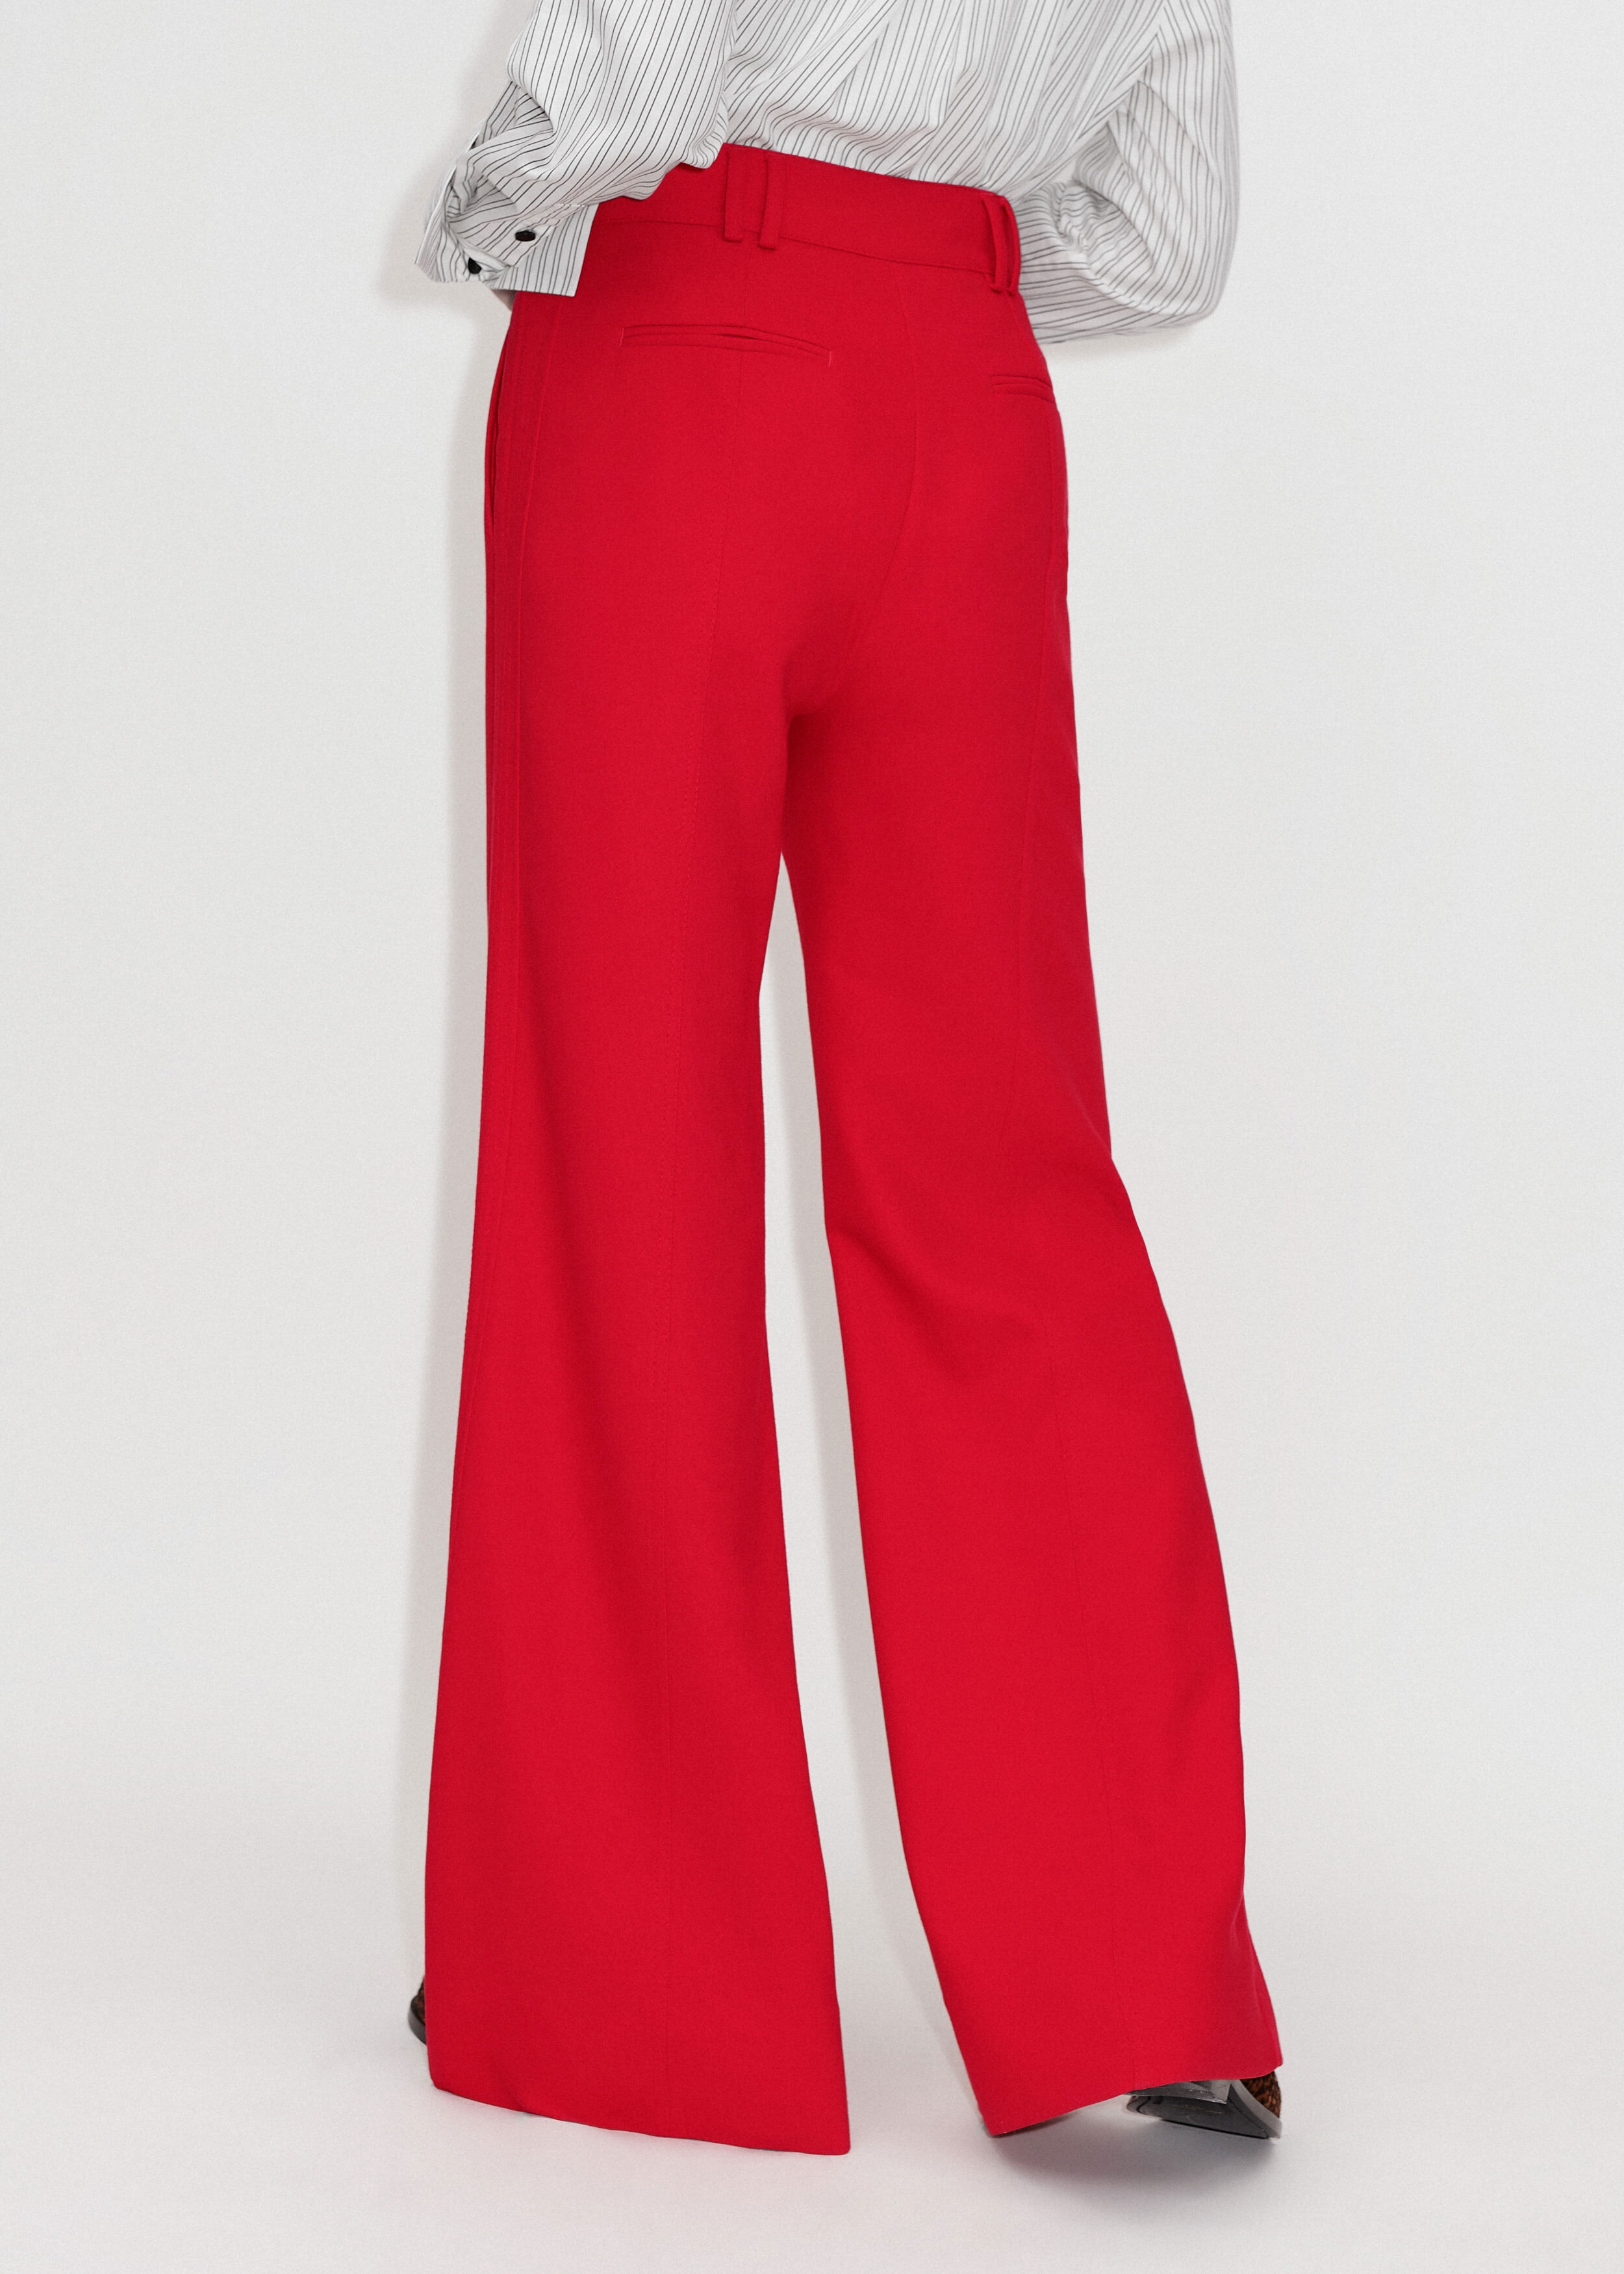 IN Red 153018605600C154 Trousers Size 38/34 Metric Size C154 